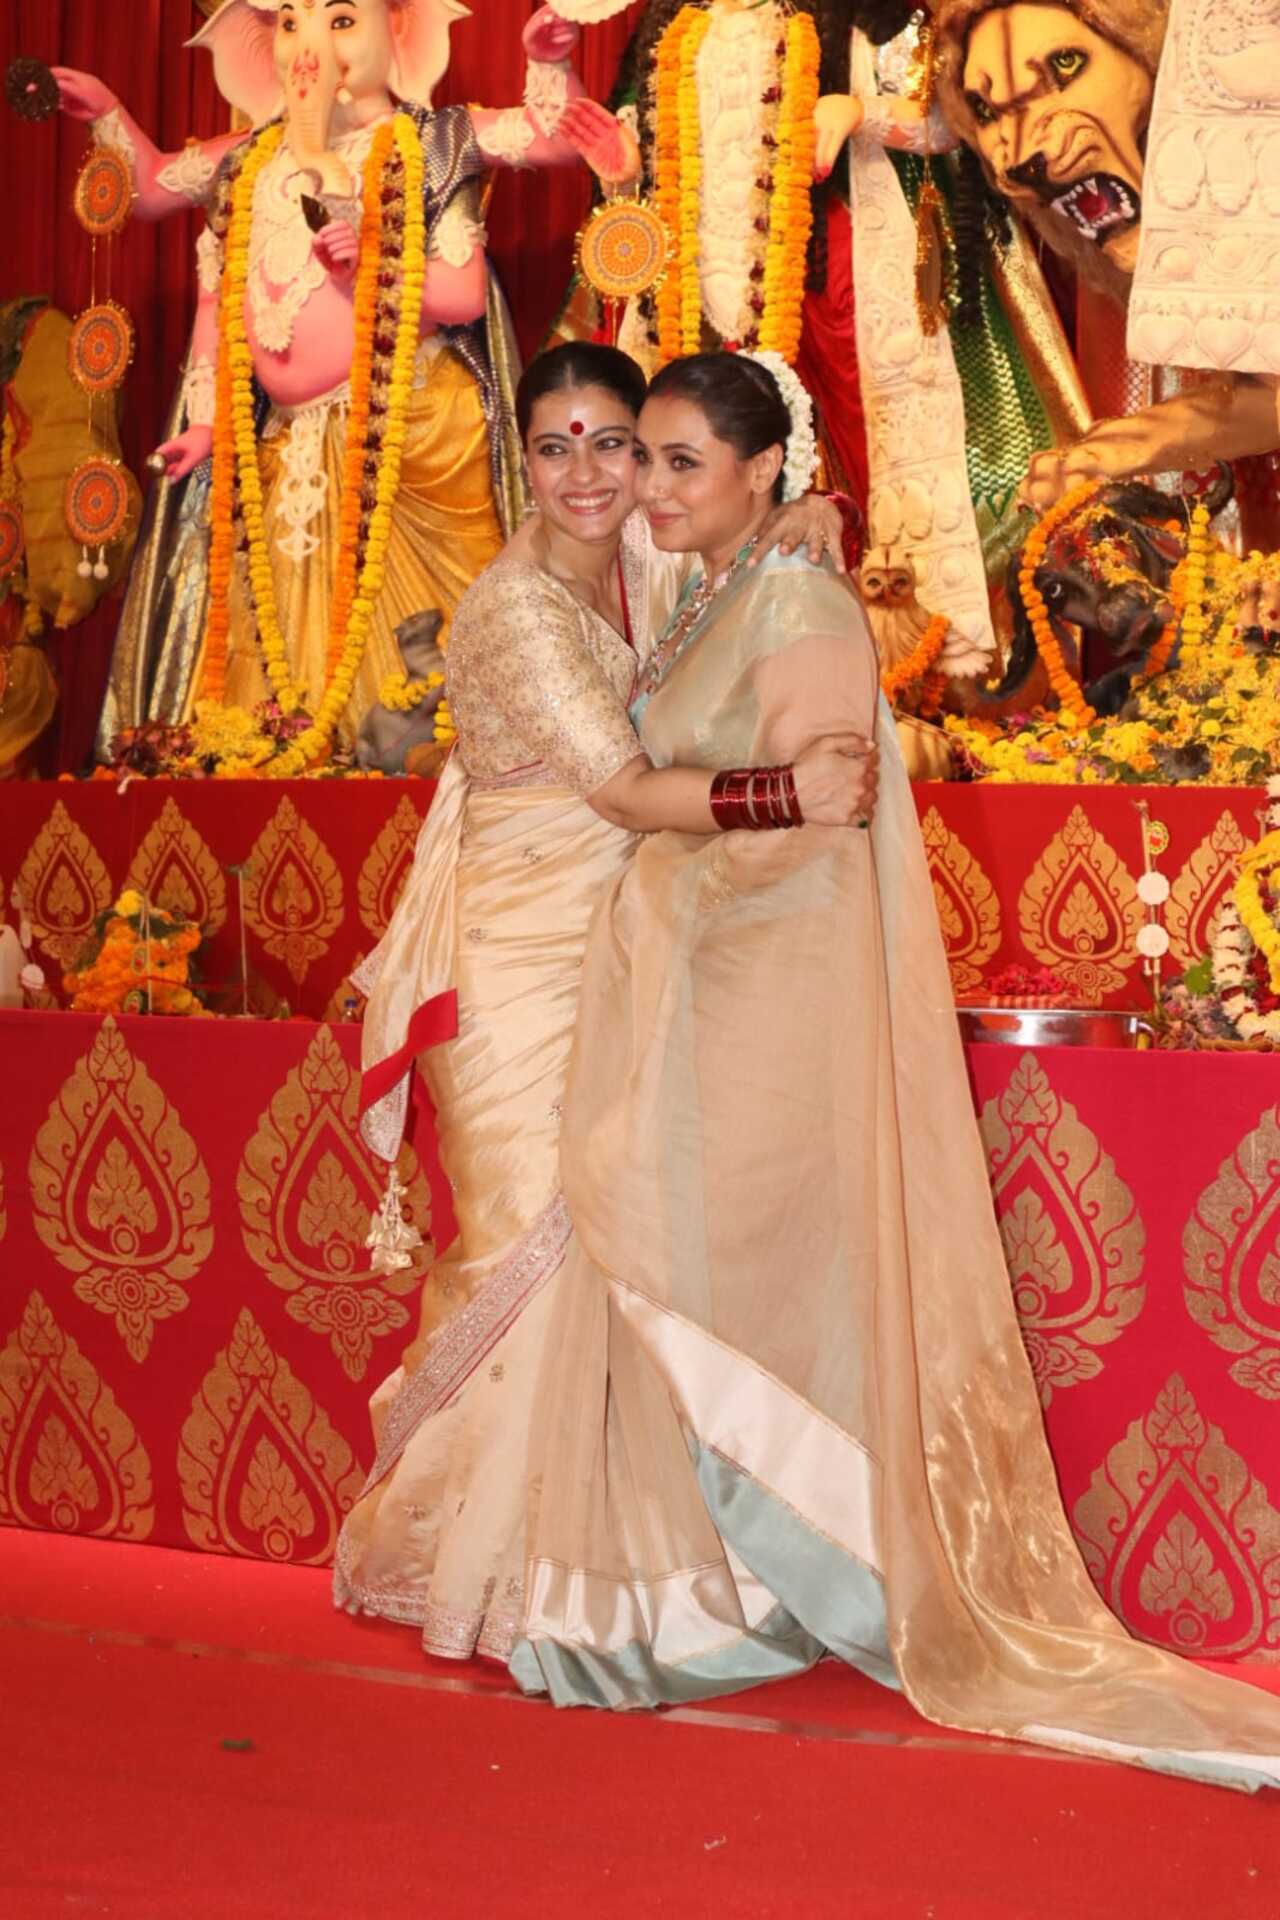 Rani and Kajol hugged each other while posing for pictures